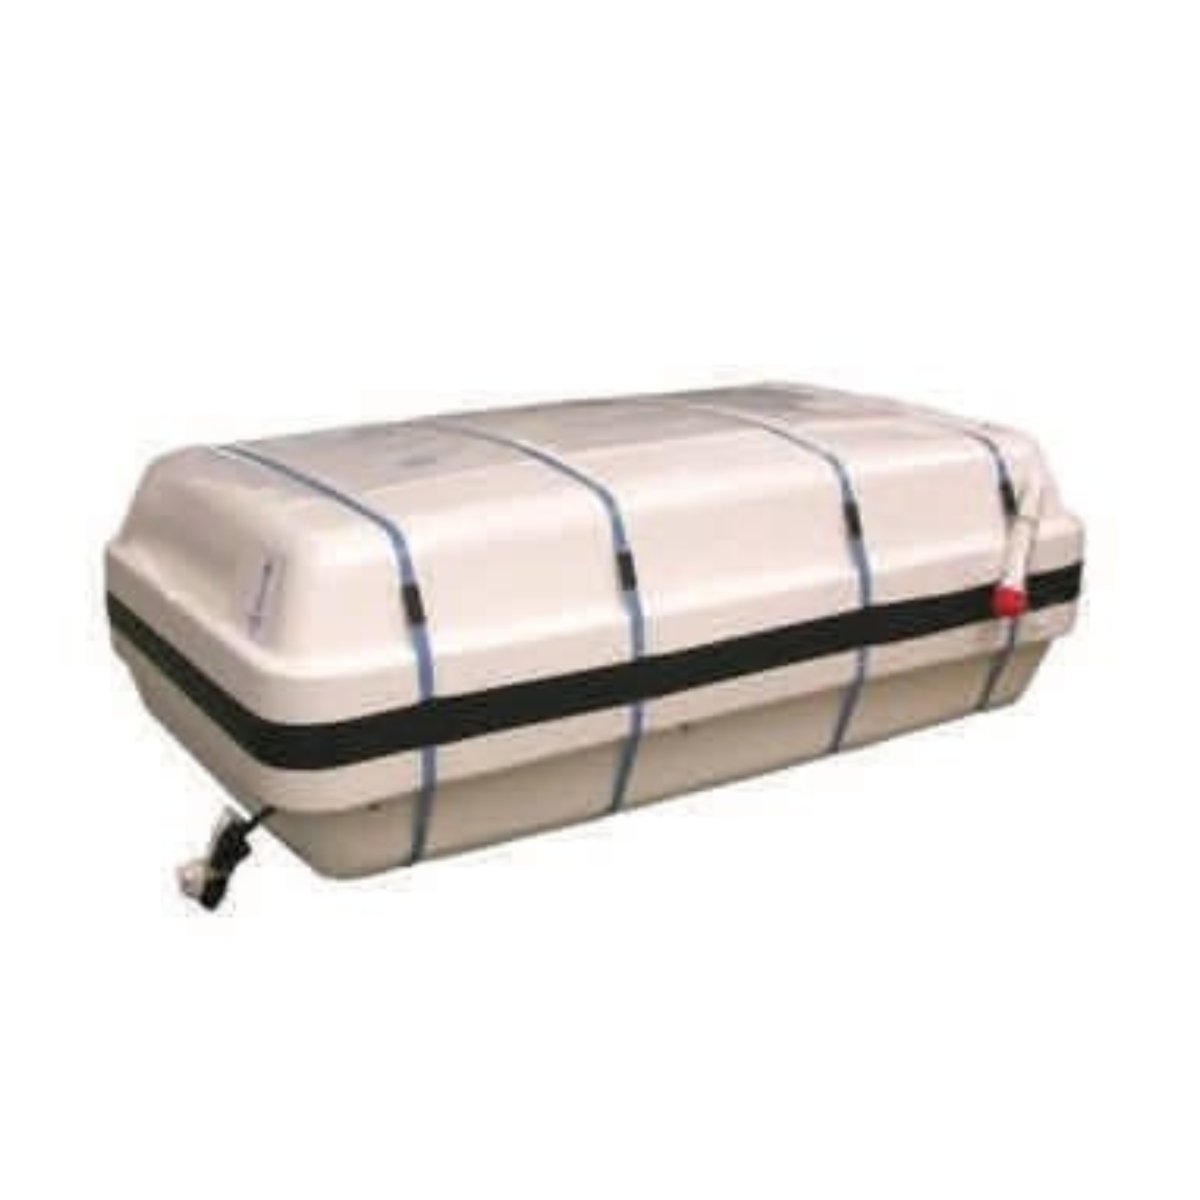 SURVITEC ZODIAC XTREM USCG/SOLAS Approved Life Raft With Cradle, 6 - 16 Person - Life Raft Professionals